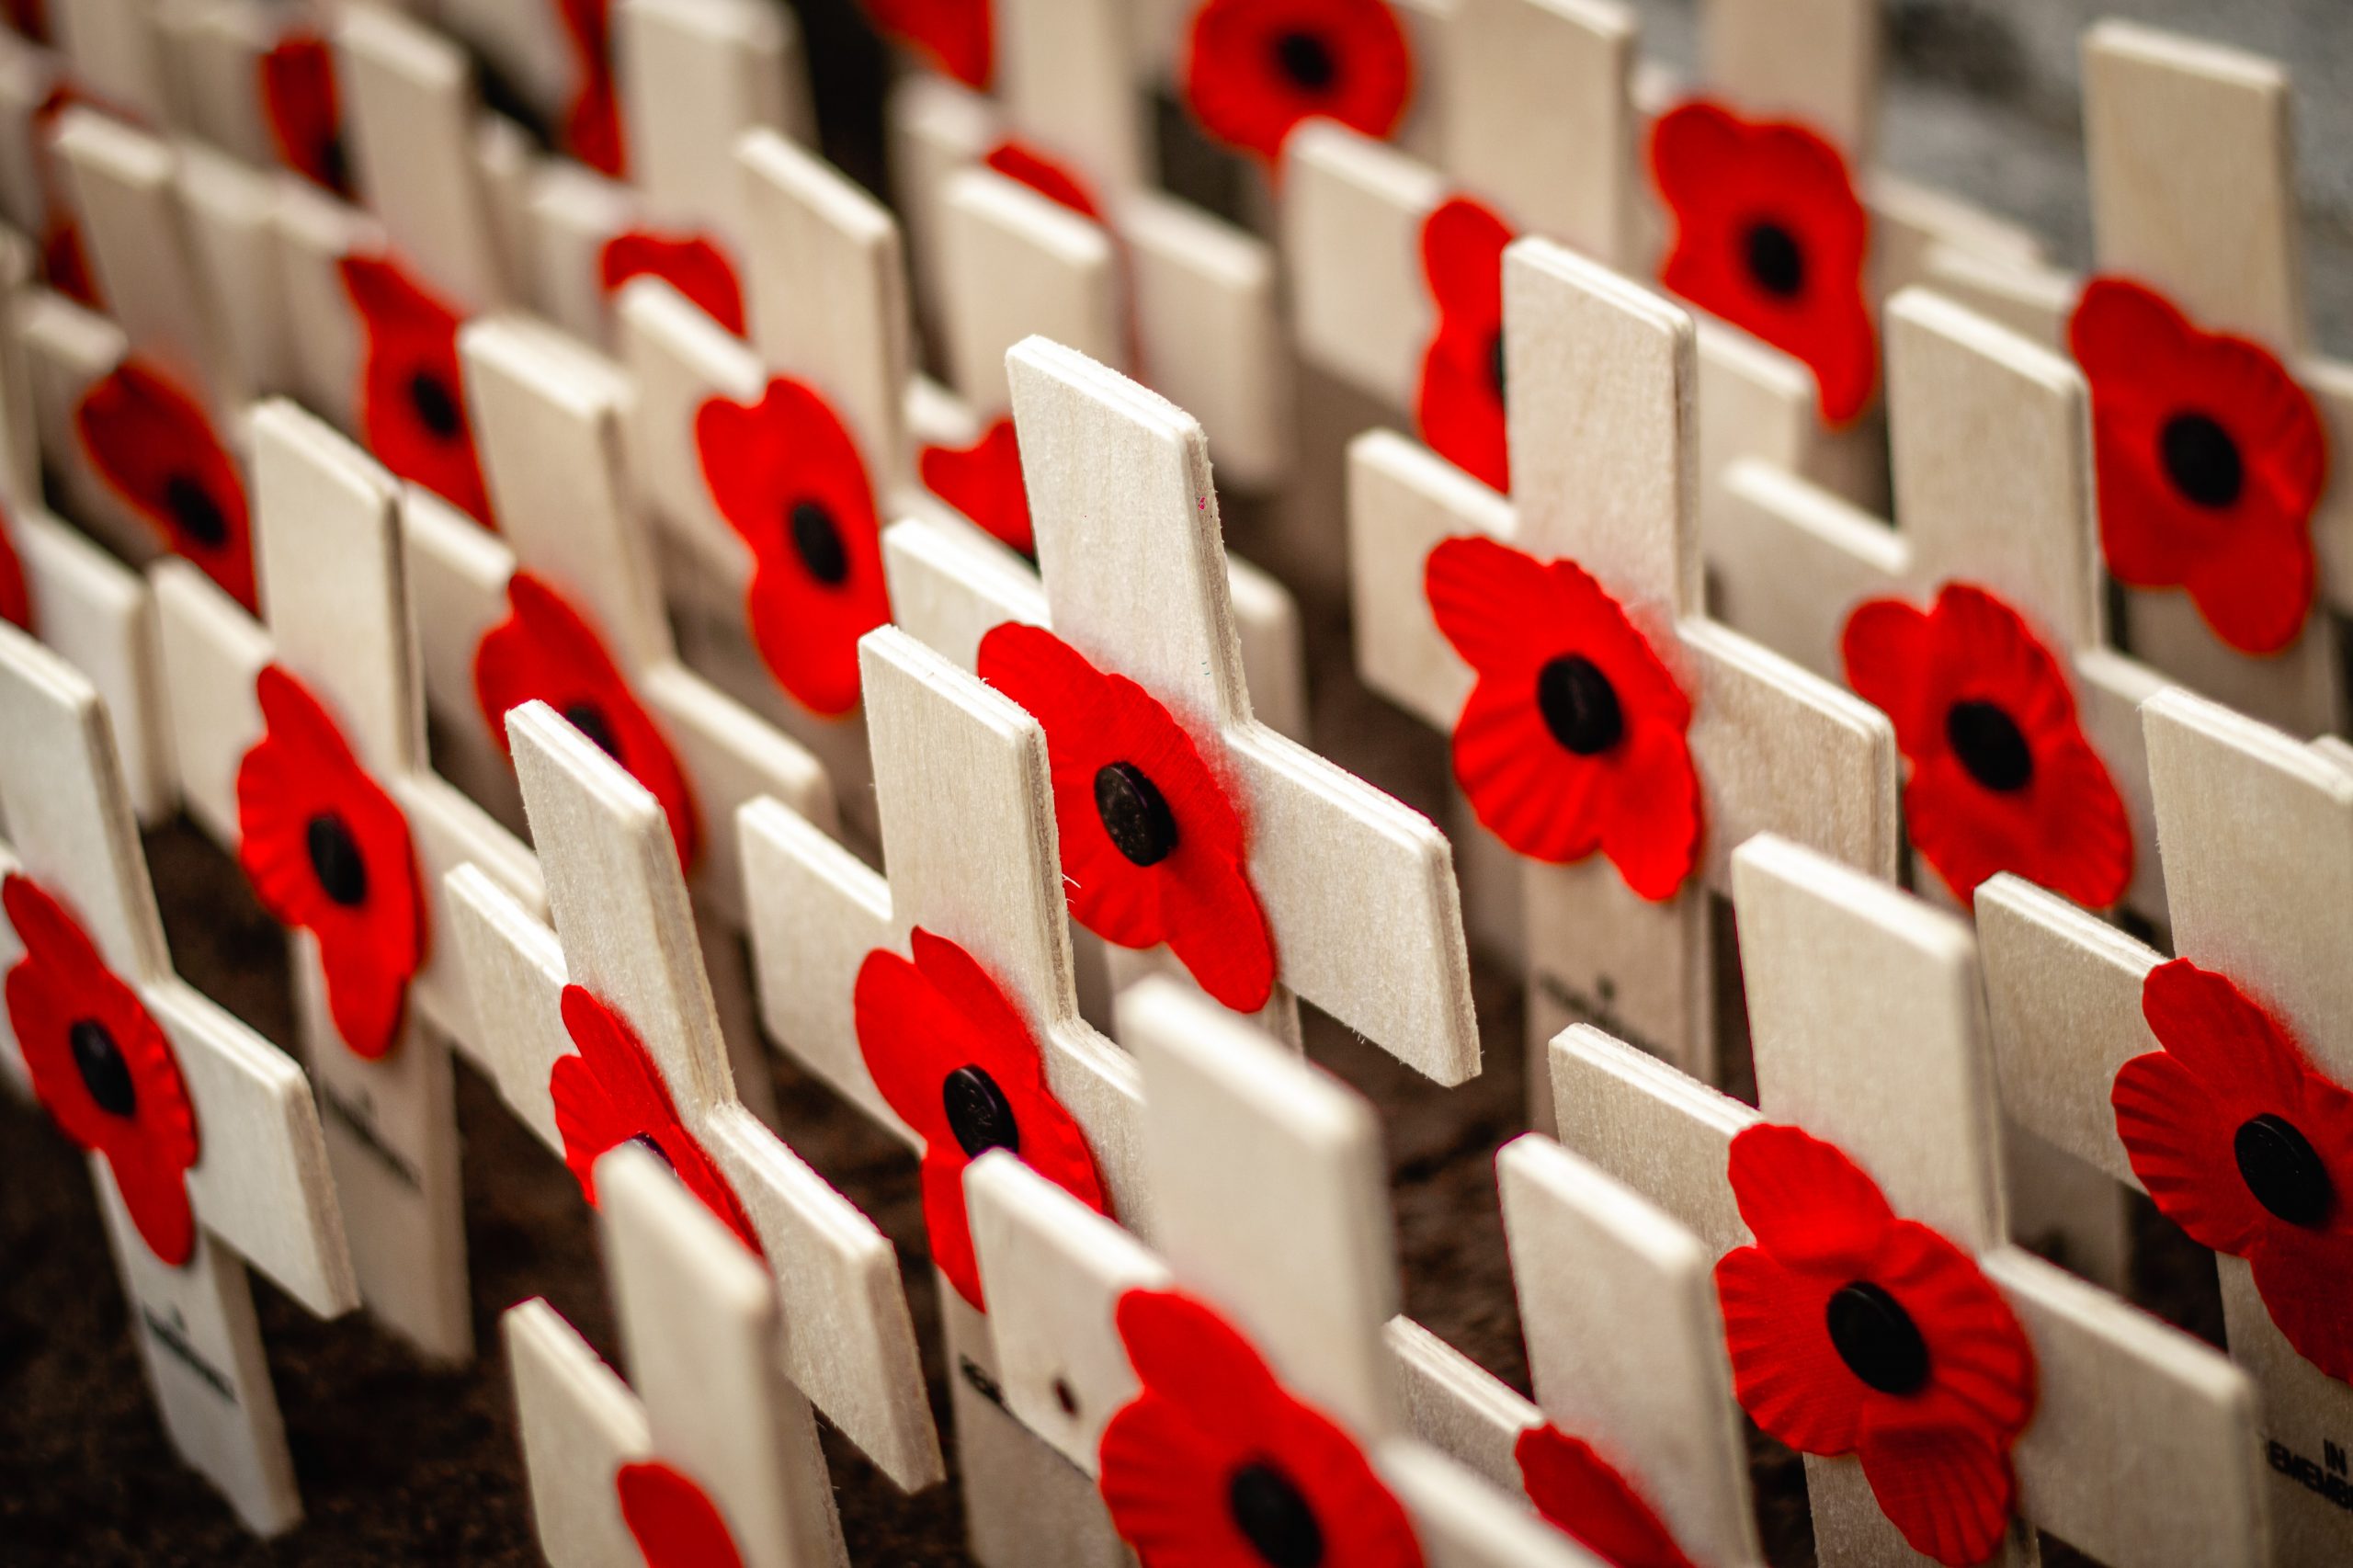 Armistice Day 2020: Remembering Stories that Time has Forgotten